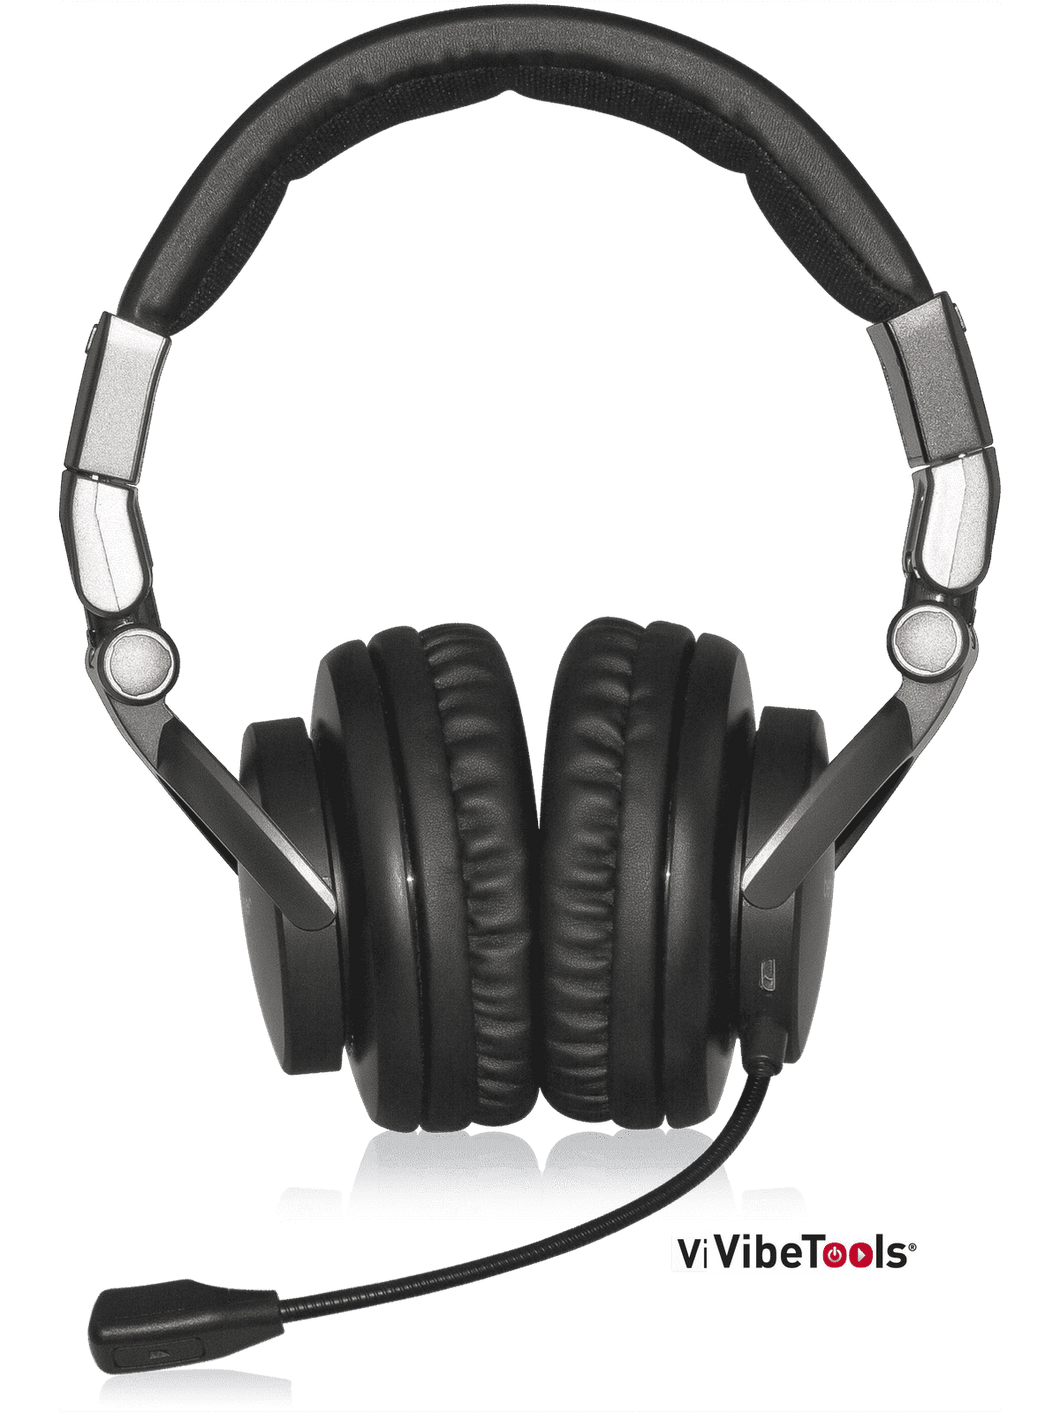 Behringer BB 560M High-Quality Professional Headphones with Built-in Microphone